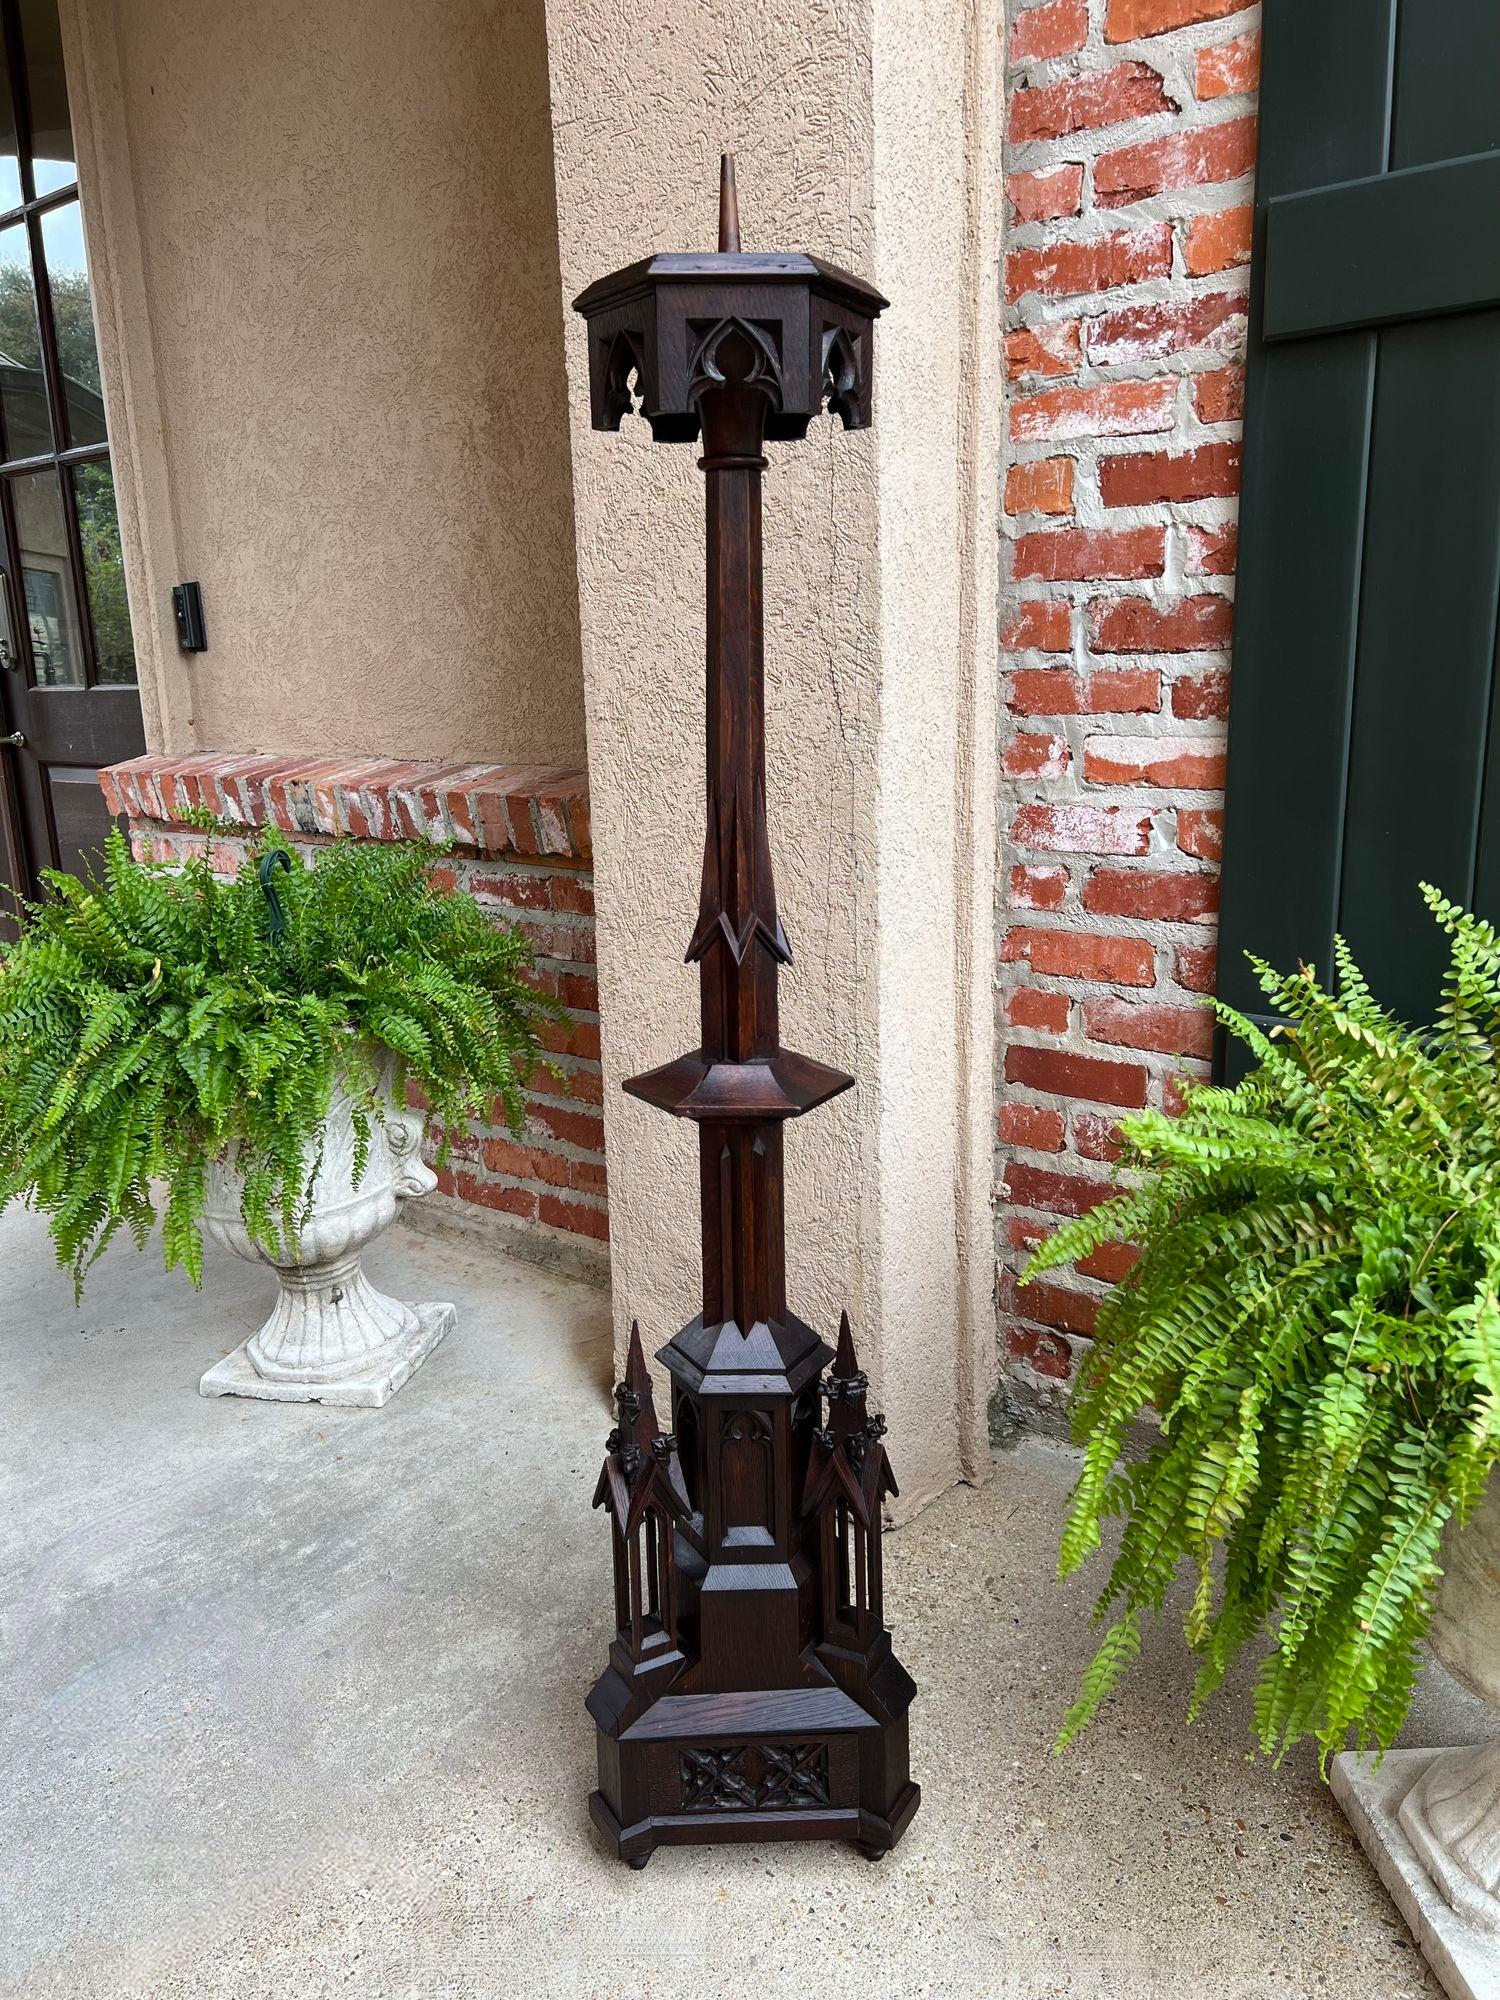 TALL Antique French Gothic Revival Cathedral Spire Candlestick Pricket Carved Oak.

Direct from France, a highly carved antique French oak Gothic Revival cathedral spire or pricket. Tall and majestic, with open carvings and gothic tracery